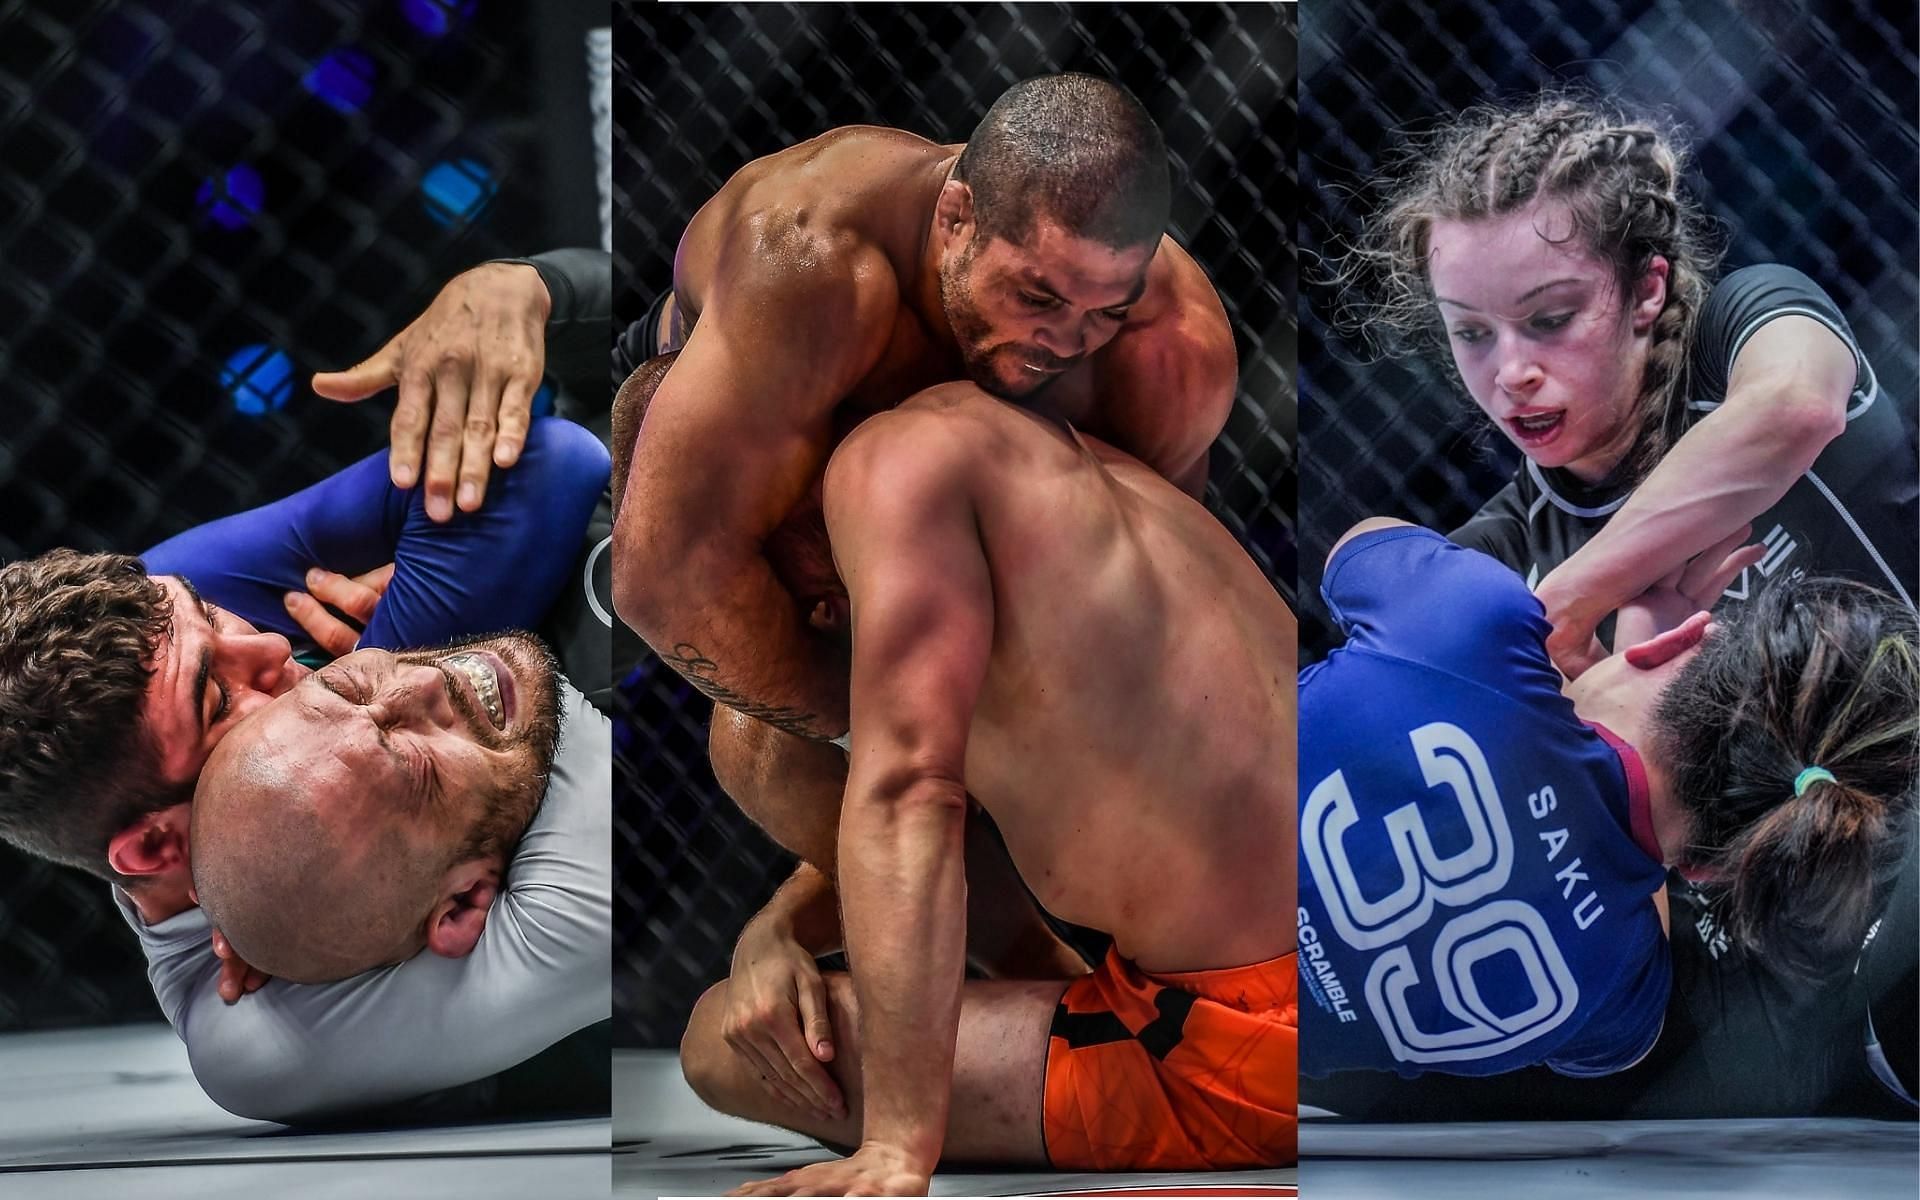 ONE Championship has had some of the best submission grappling matches in recent years. (Images courtesy of ONE Championship)